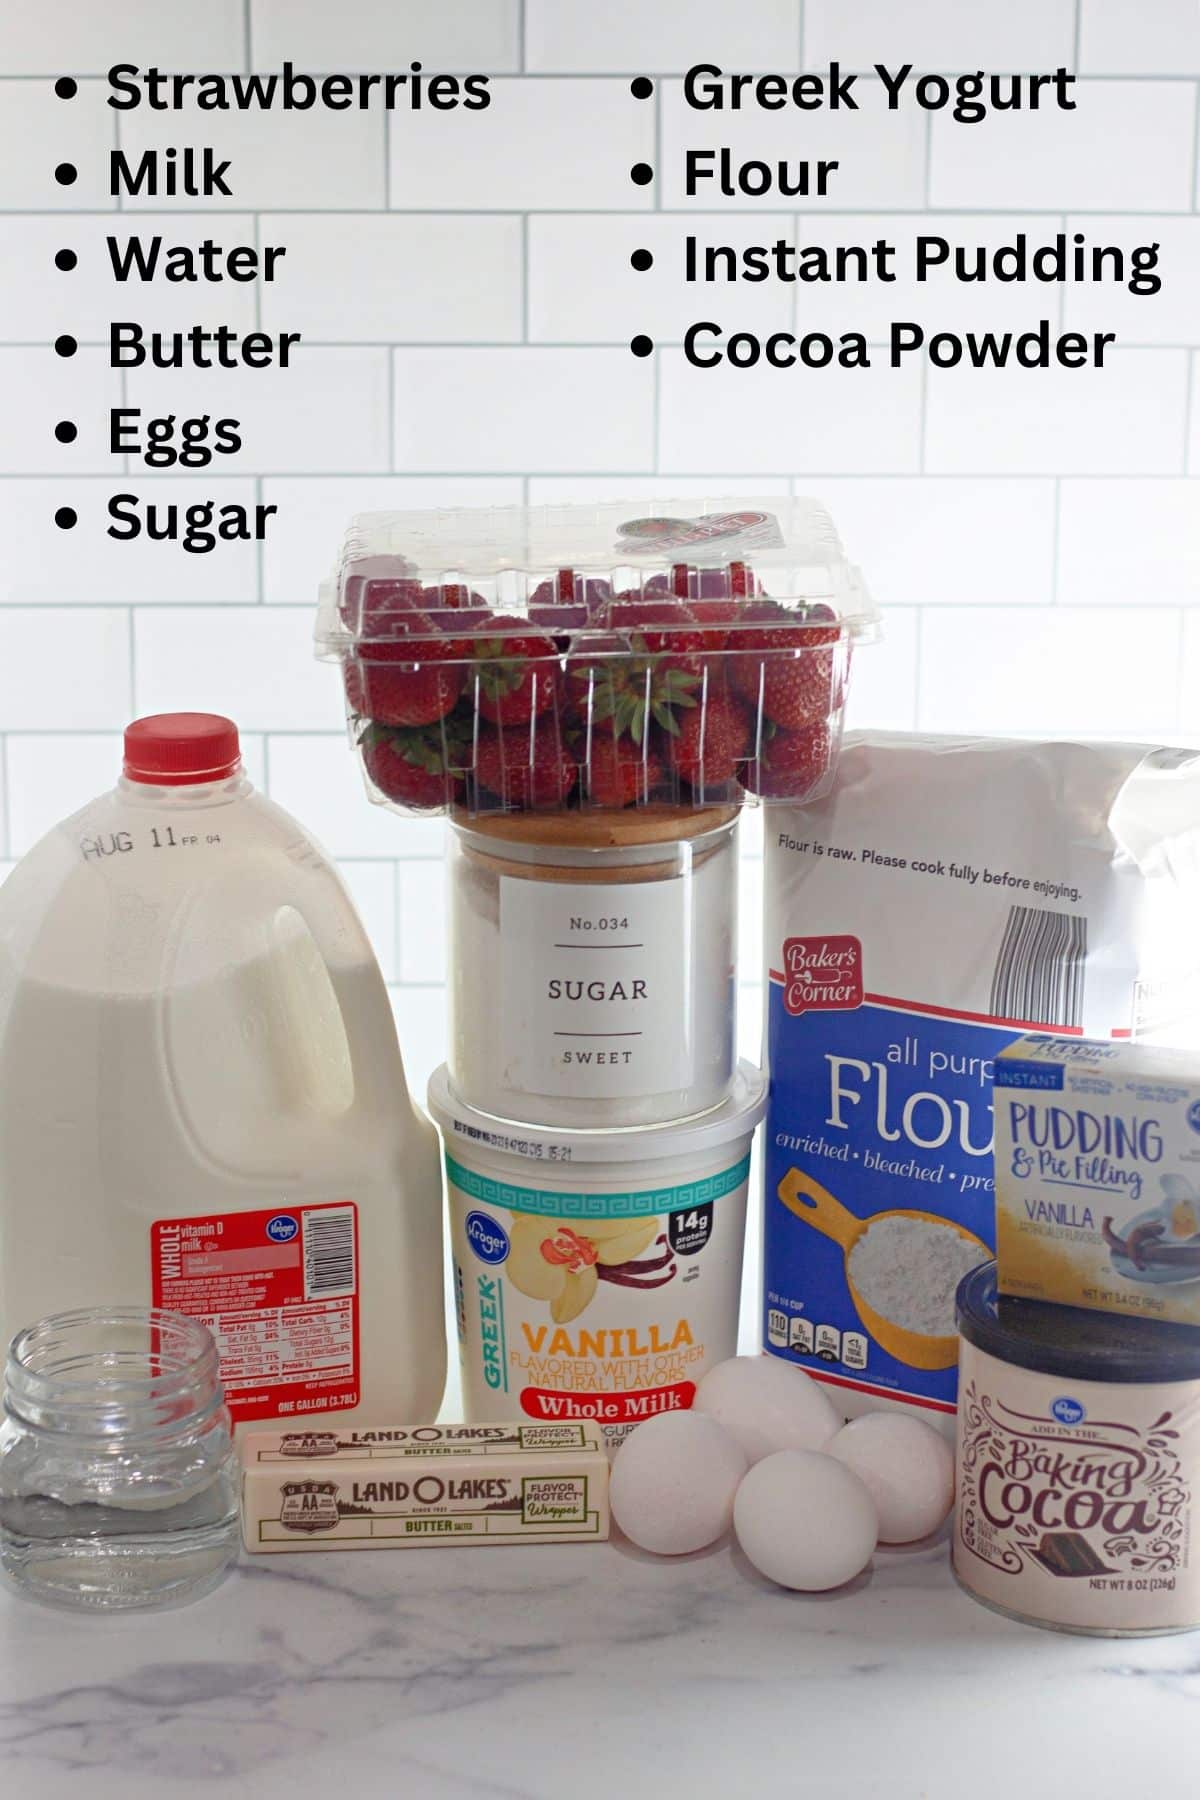 Labeled ingredients shown for cream puffs with strawberries. 